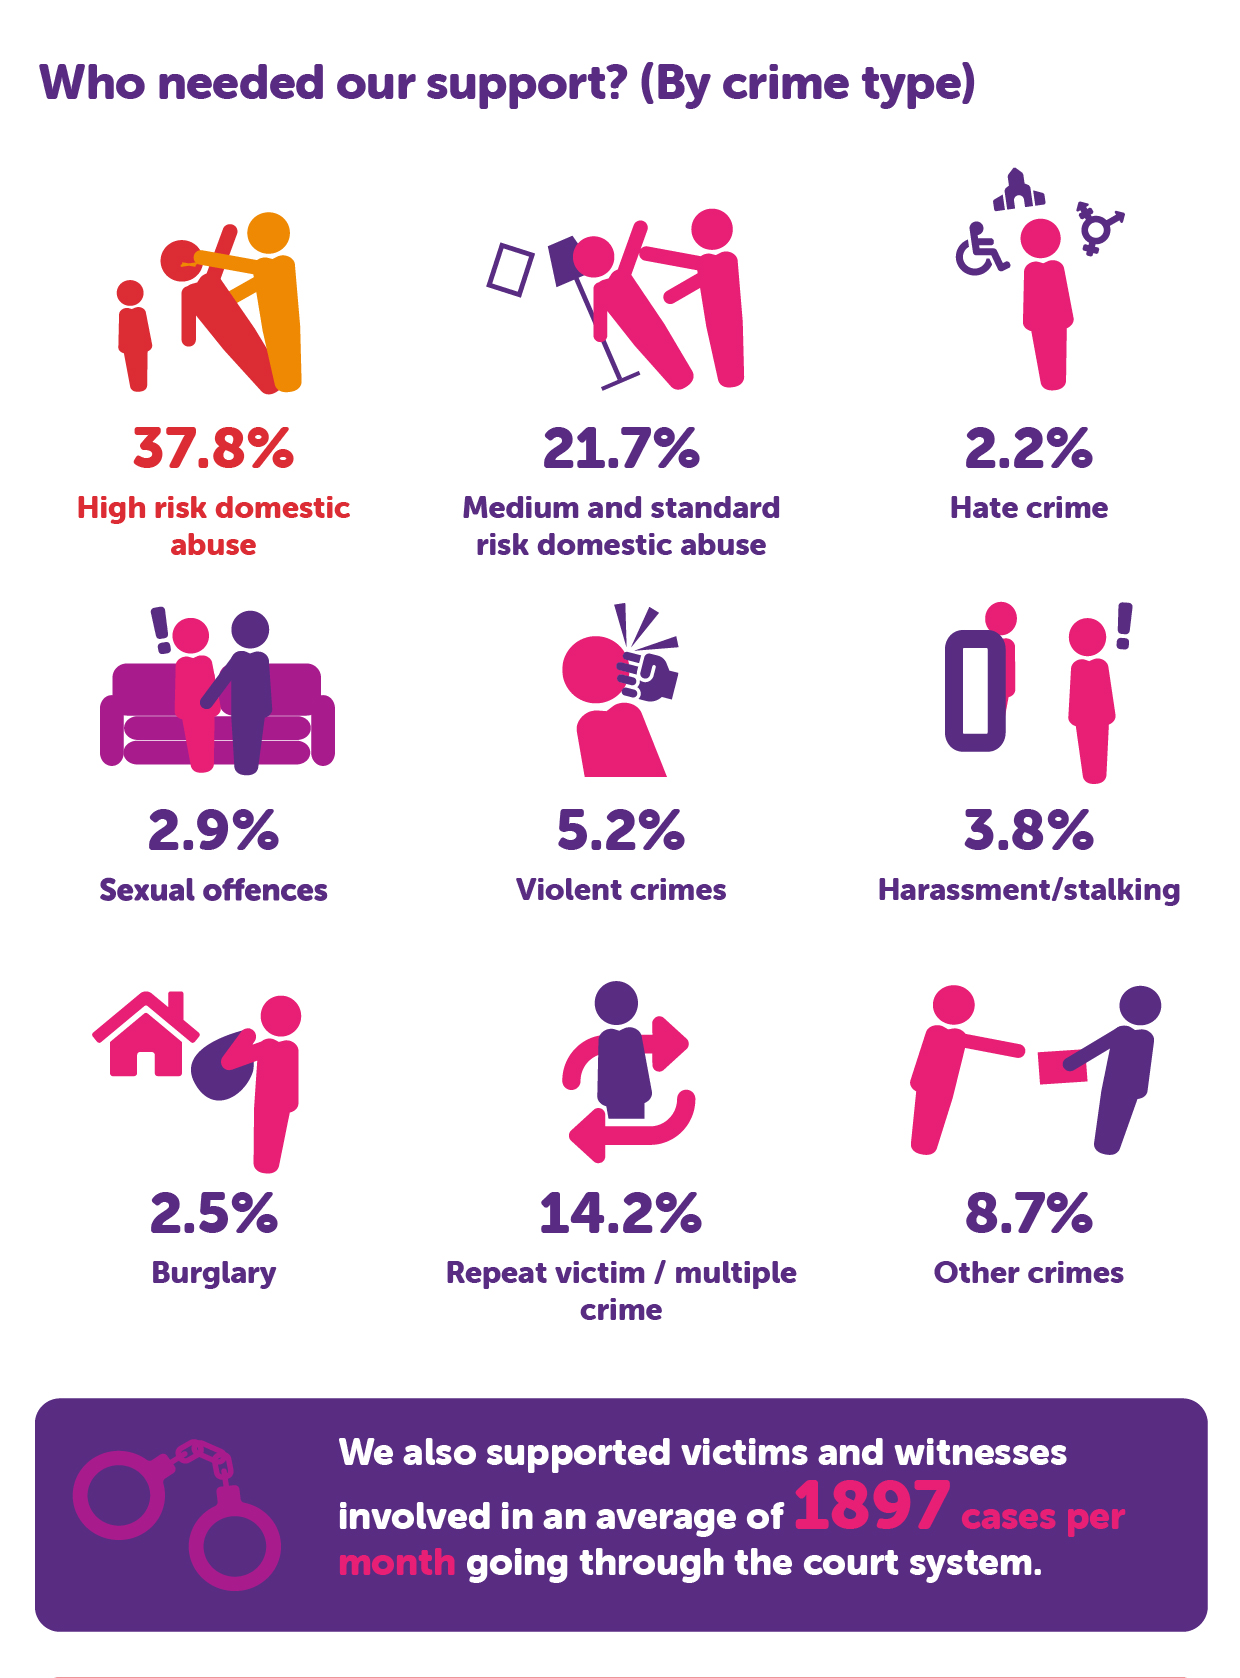 Who needed our support? (By crime type) 37.8% High risk domestic abuse 21.7% Medium and standard risk domestic abuse 2.2% Hate crime 2.9% Sexual offences 5.2% Violent crimes 3.8% Harassment/stalking 2.5% Burglary 14.2% Repeat victim / multiple crime 8.7% Other crimes We also supported victims and witnesses involved in an average of 1897 cases per month going through the court system.